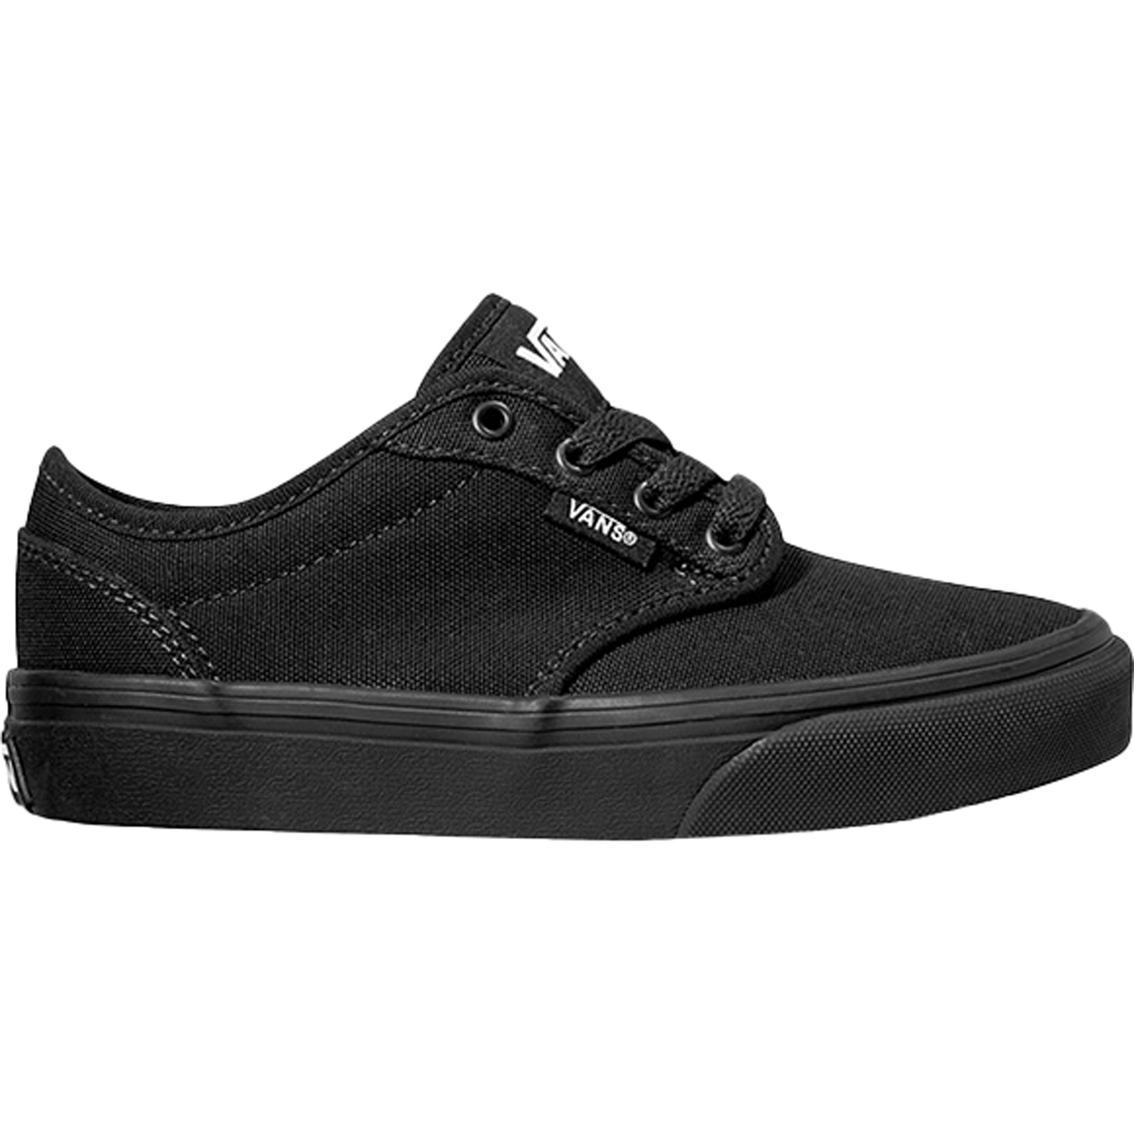 Vans Boys Atwood Canvas Sneakers